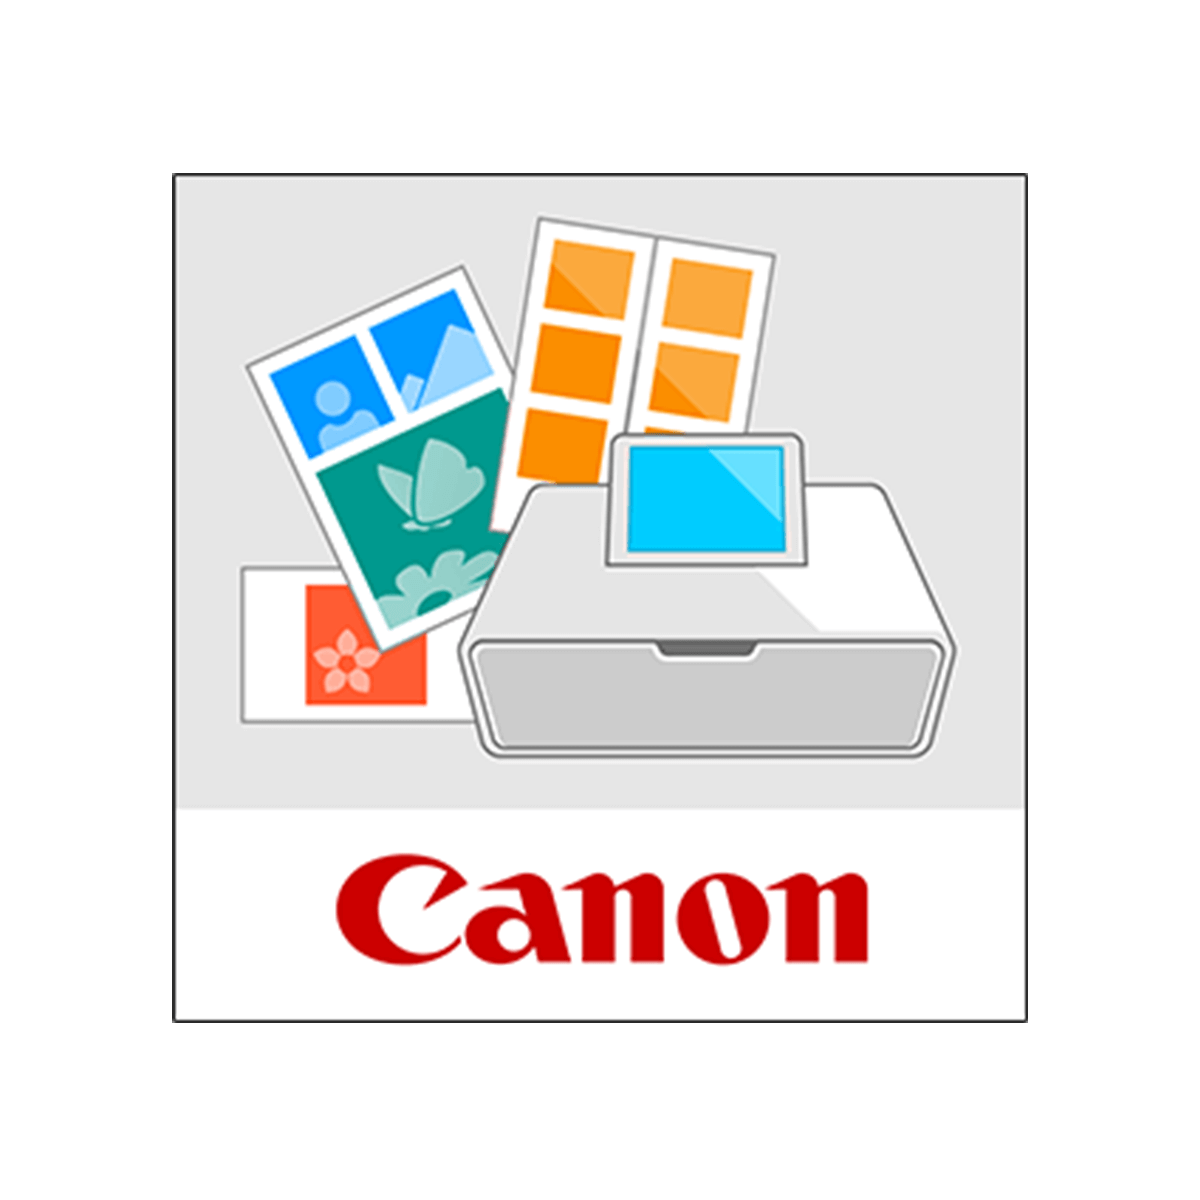 Canon SELPHY Photo Layout App